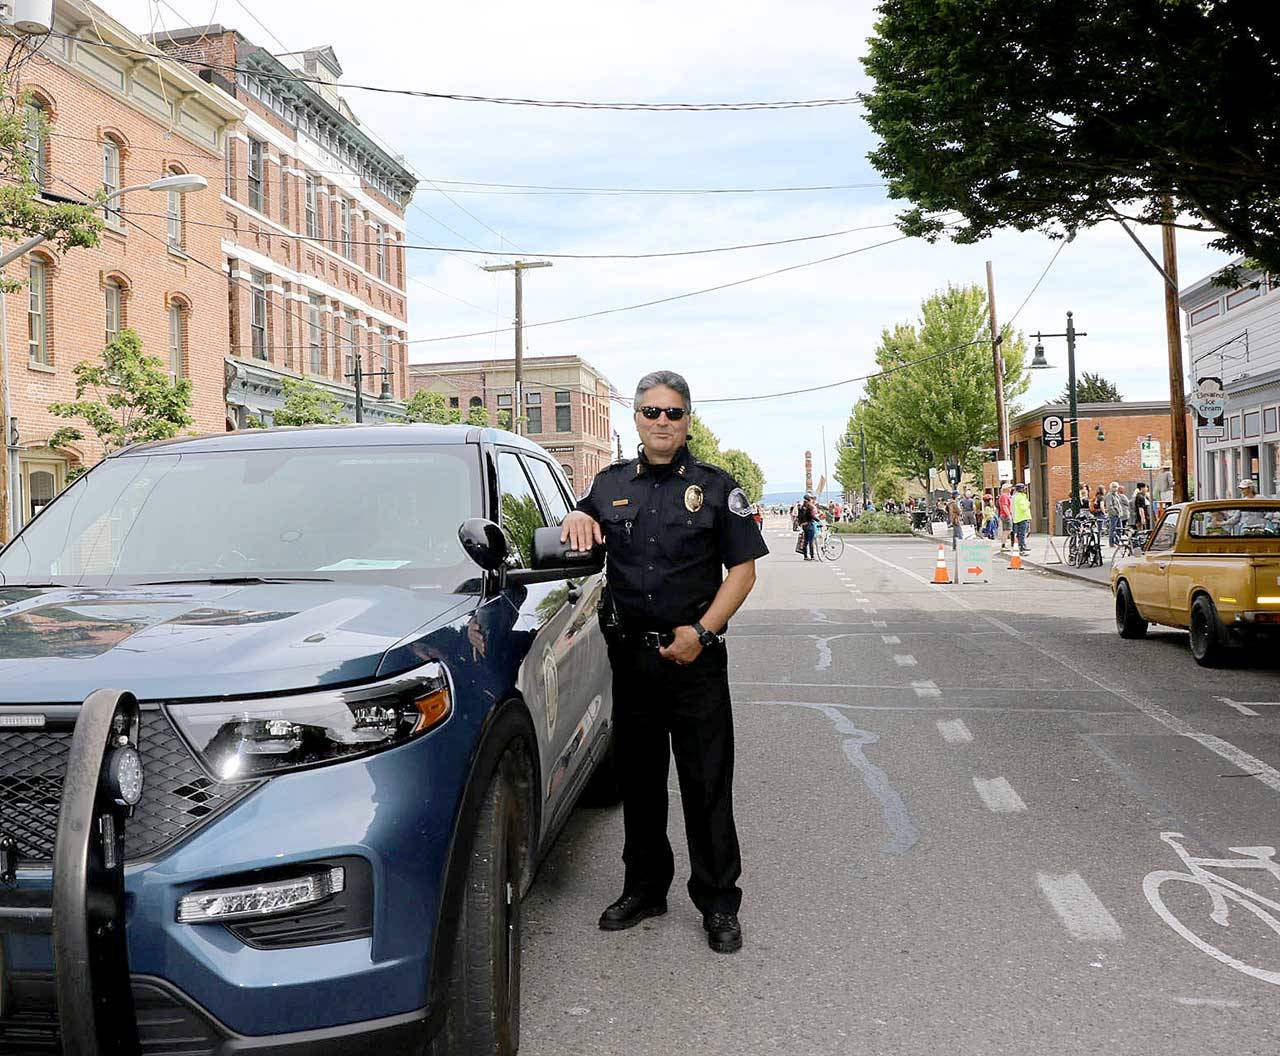 Port Townsend interim Police Chief Troy Surber stands with his patrol car while he prepares to help escort the Juneteenth march down Water Street last Friday. (Ken Park/Peninsula Daily News)